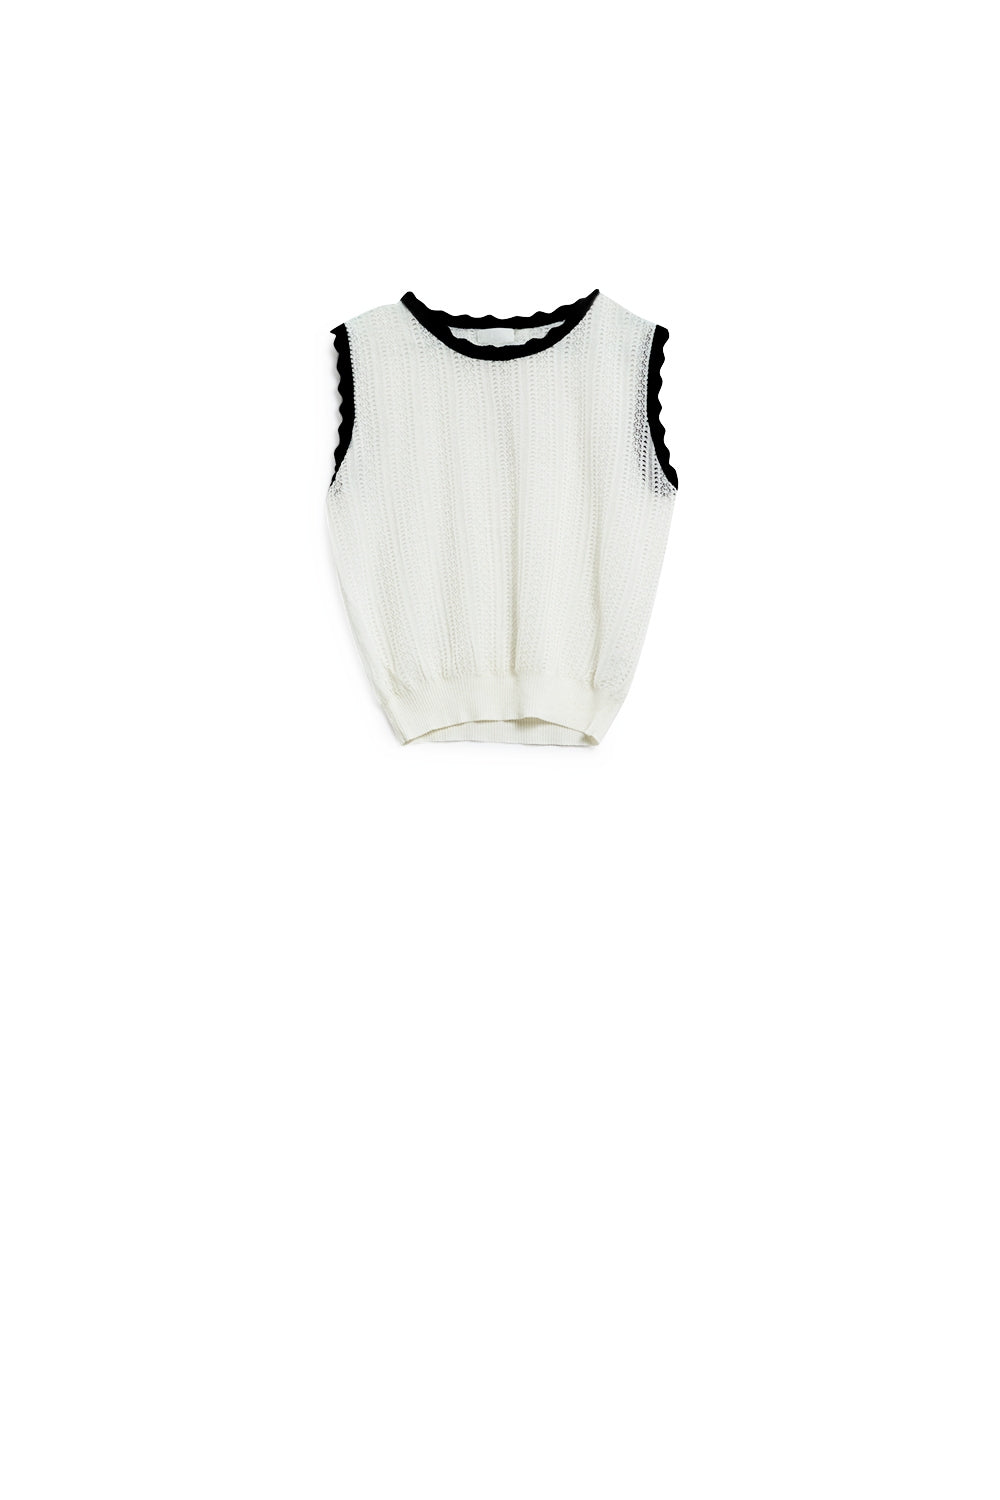 White Classic Knitted Pointelle Top With Black Wavy Trim